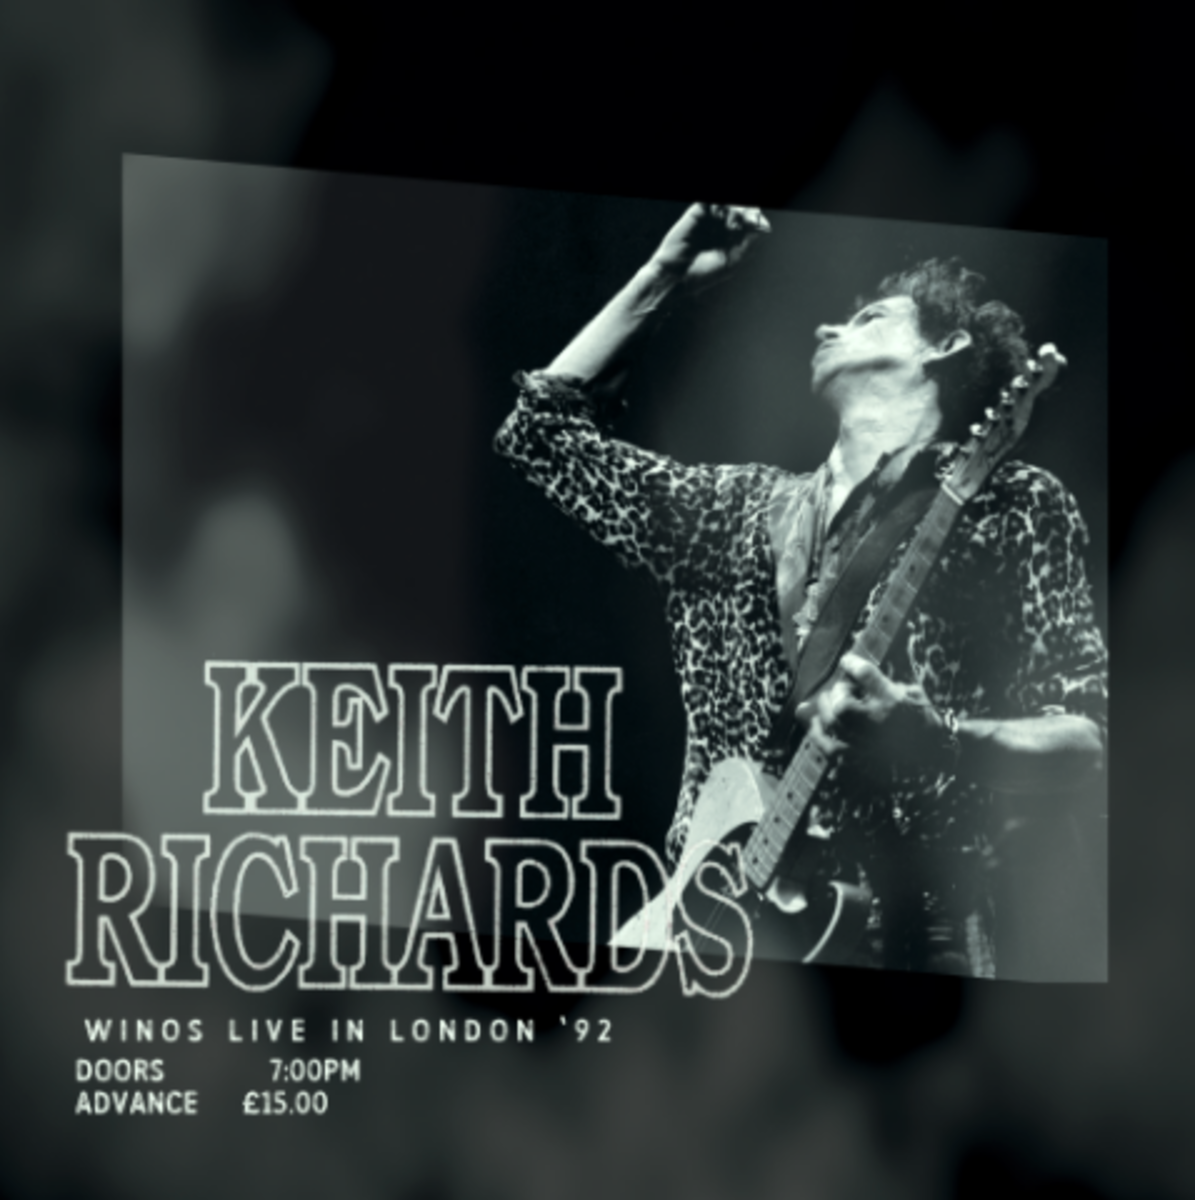 Keith Richards winos live in london cover